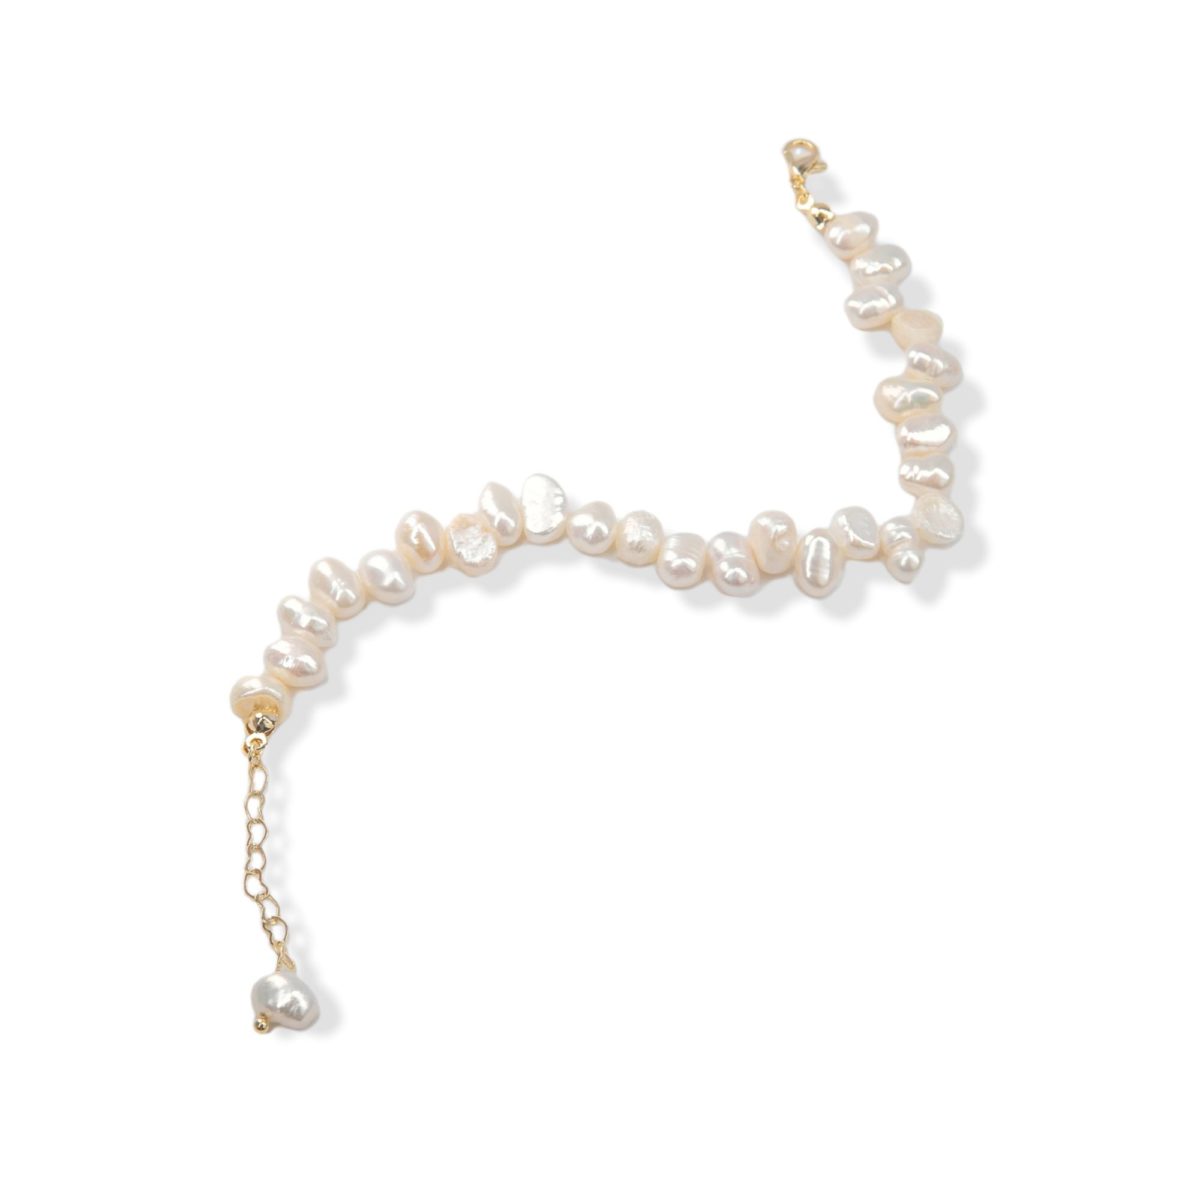 https://m.clubbella.co/product/amoura-fresh-water-pearl-bracelet/ Amoura 15